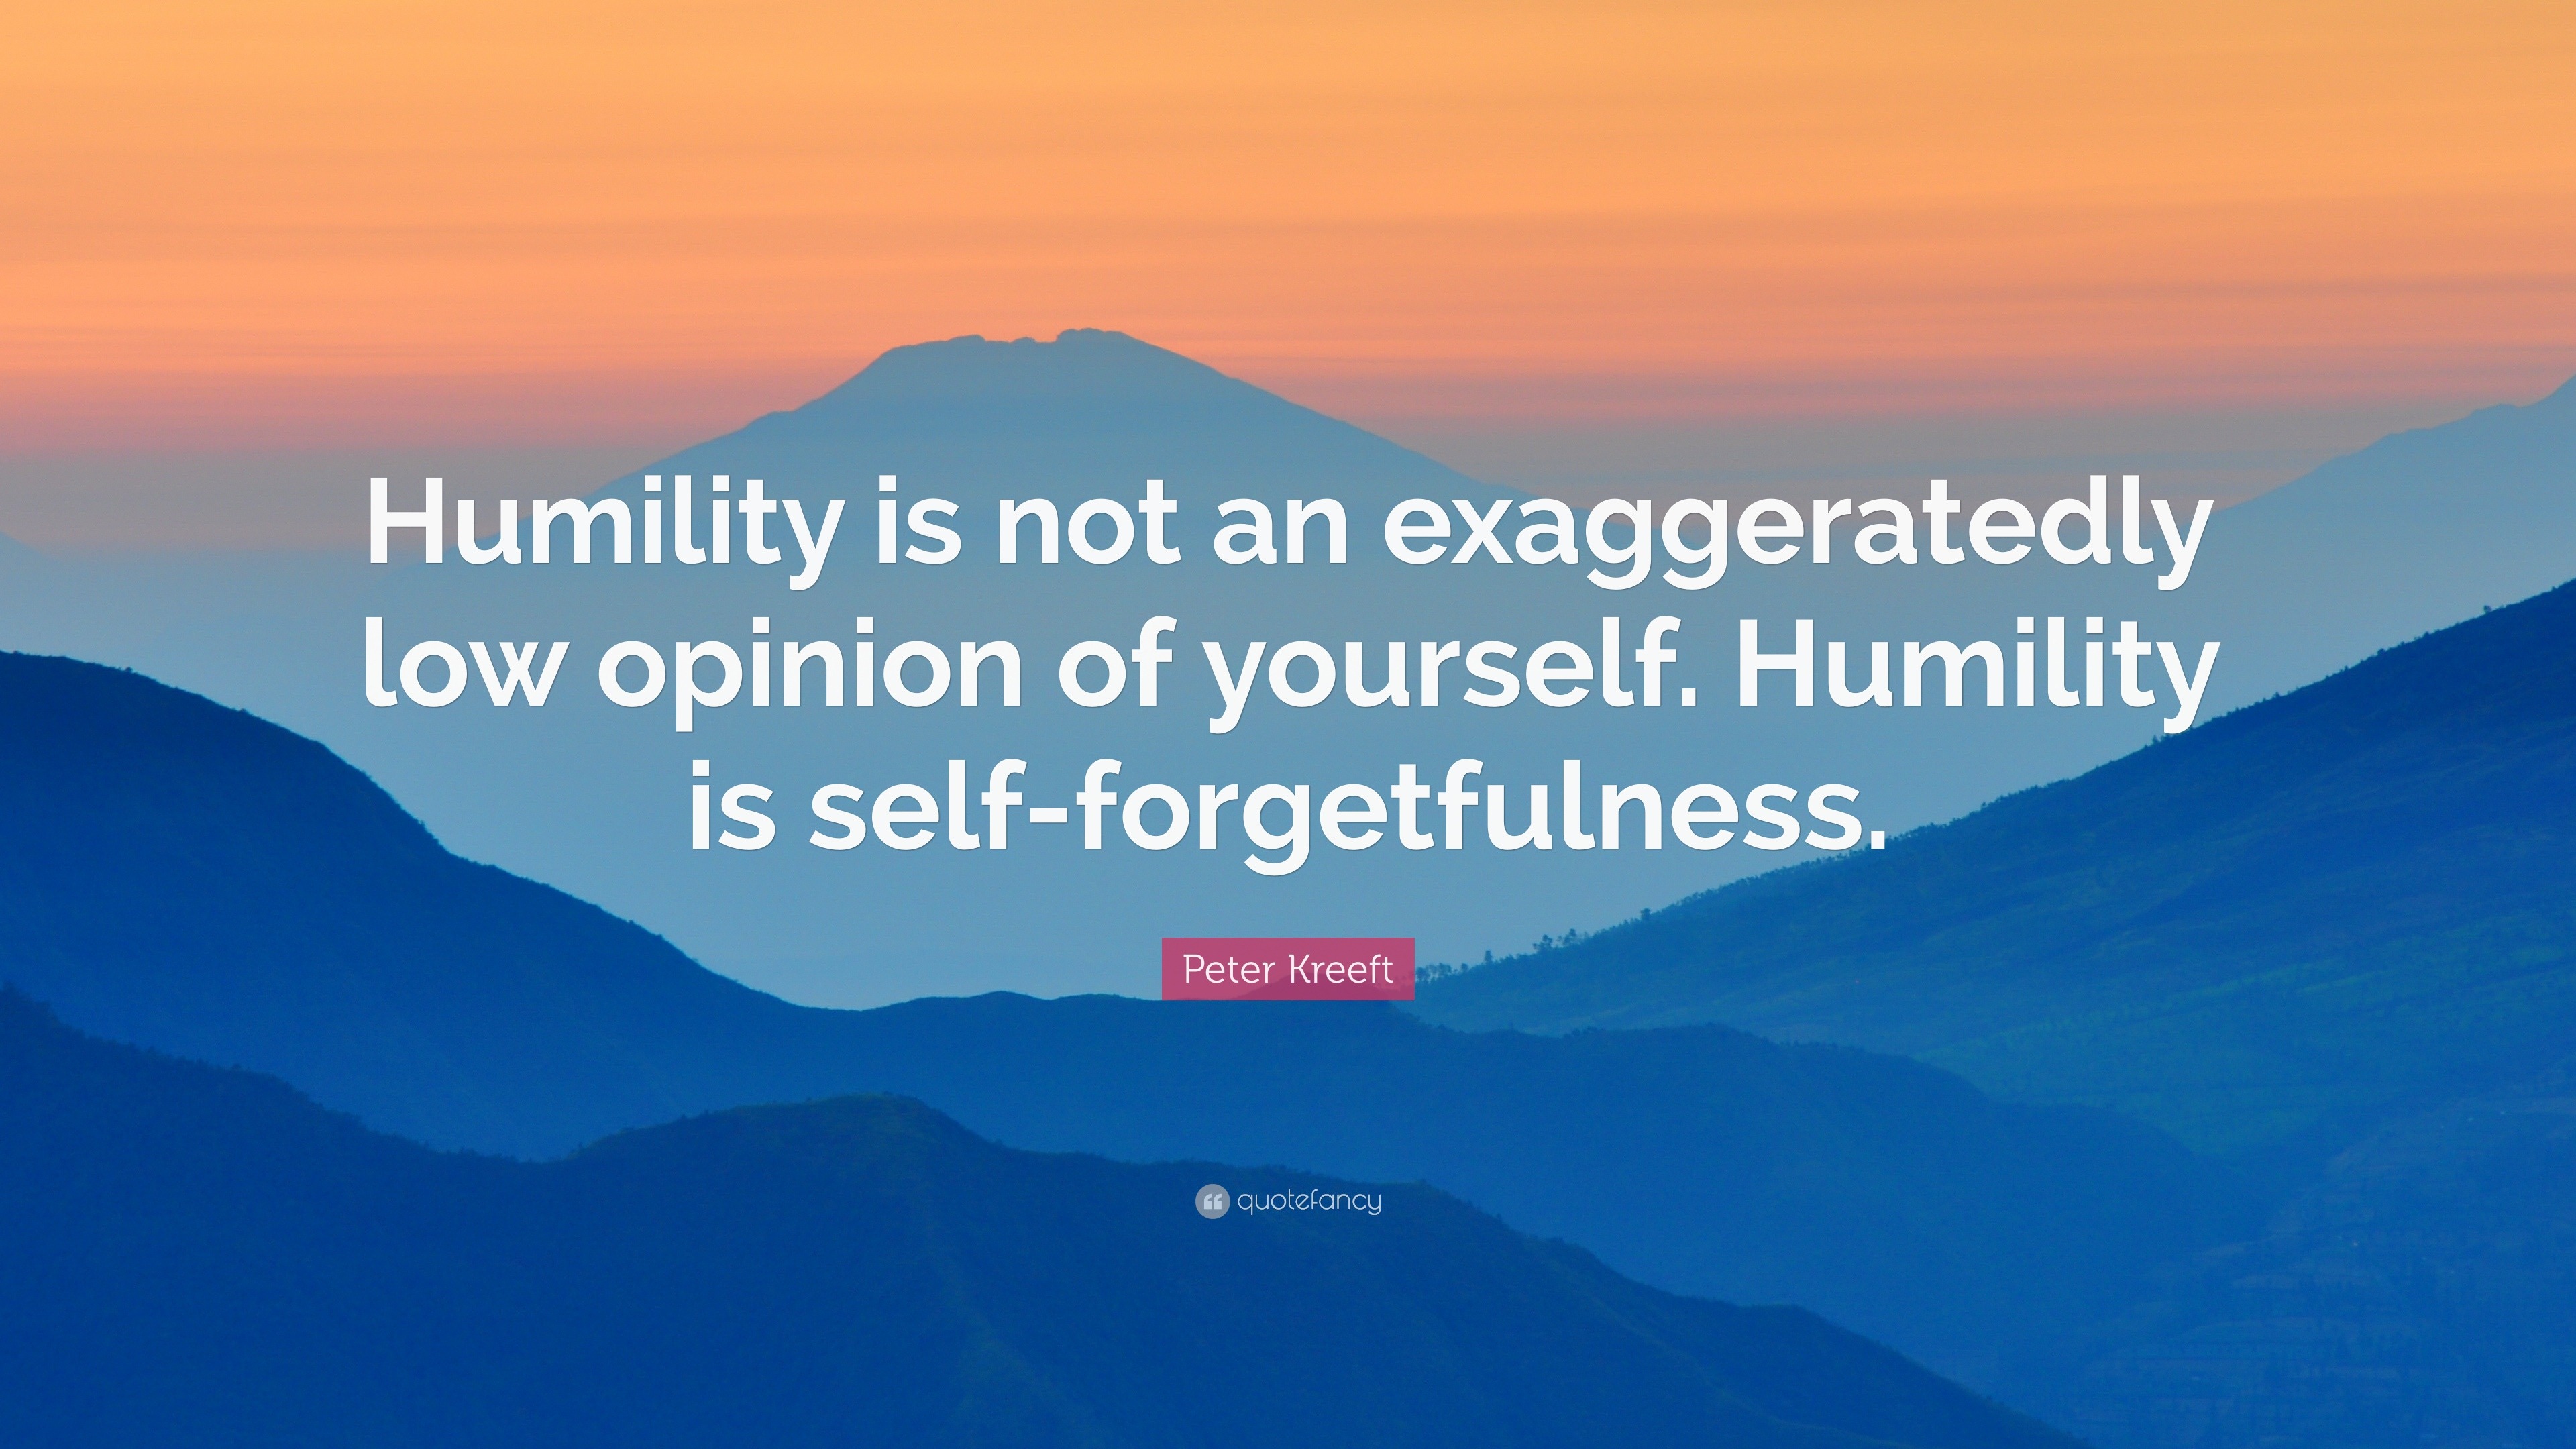 Peter Kreeft Quote: “Humility is not an exaggeratedly low opinion of ...